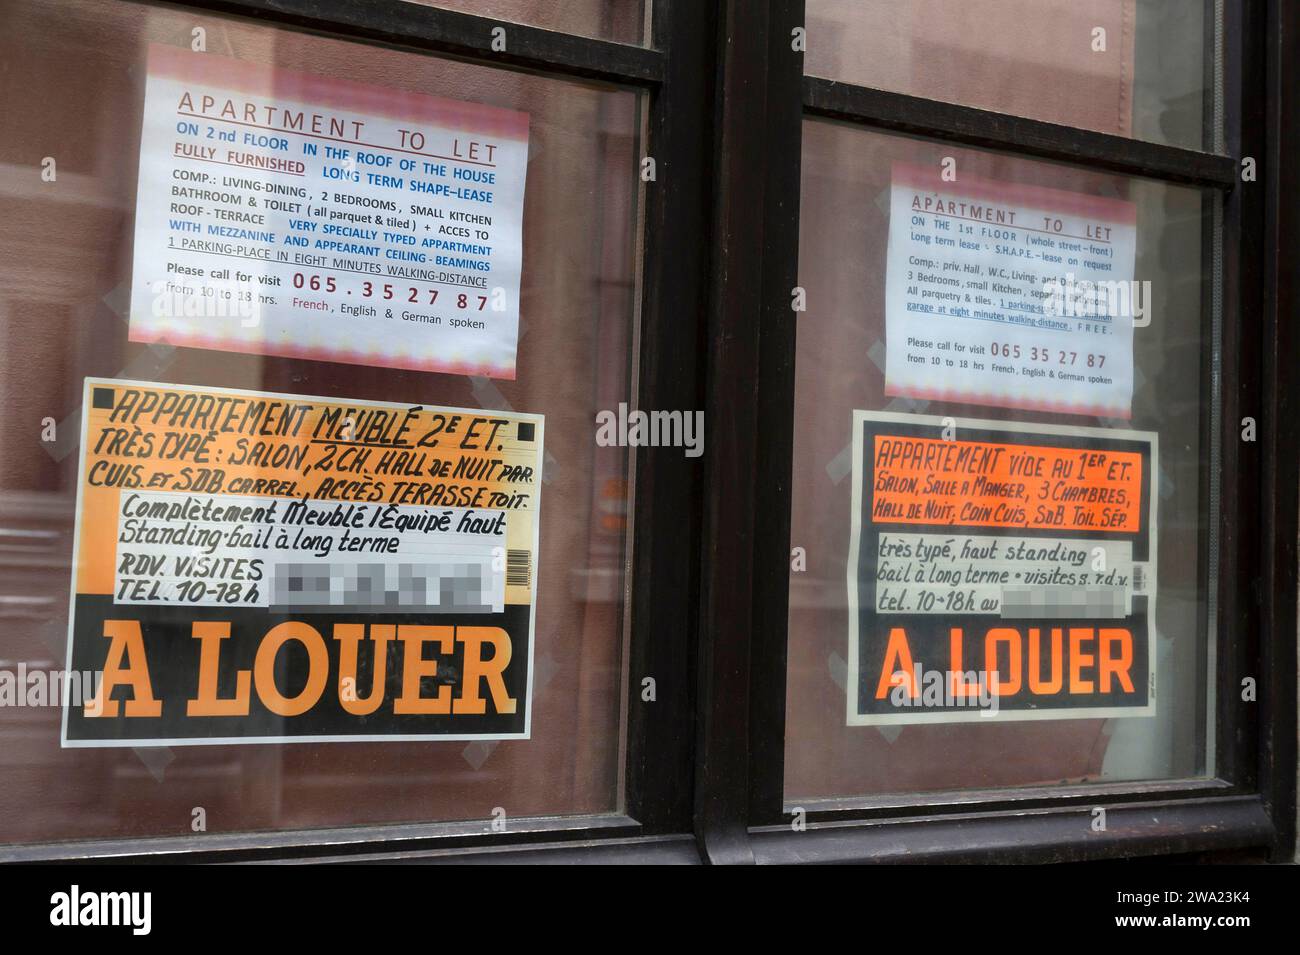 Appartements - studio a vendre ou a louer - Affiche sur les fenêtres | Flat or studio for rent or to sale - Poster on the window Stock Photo